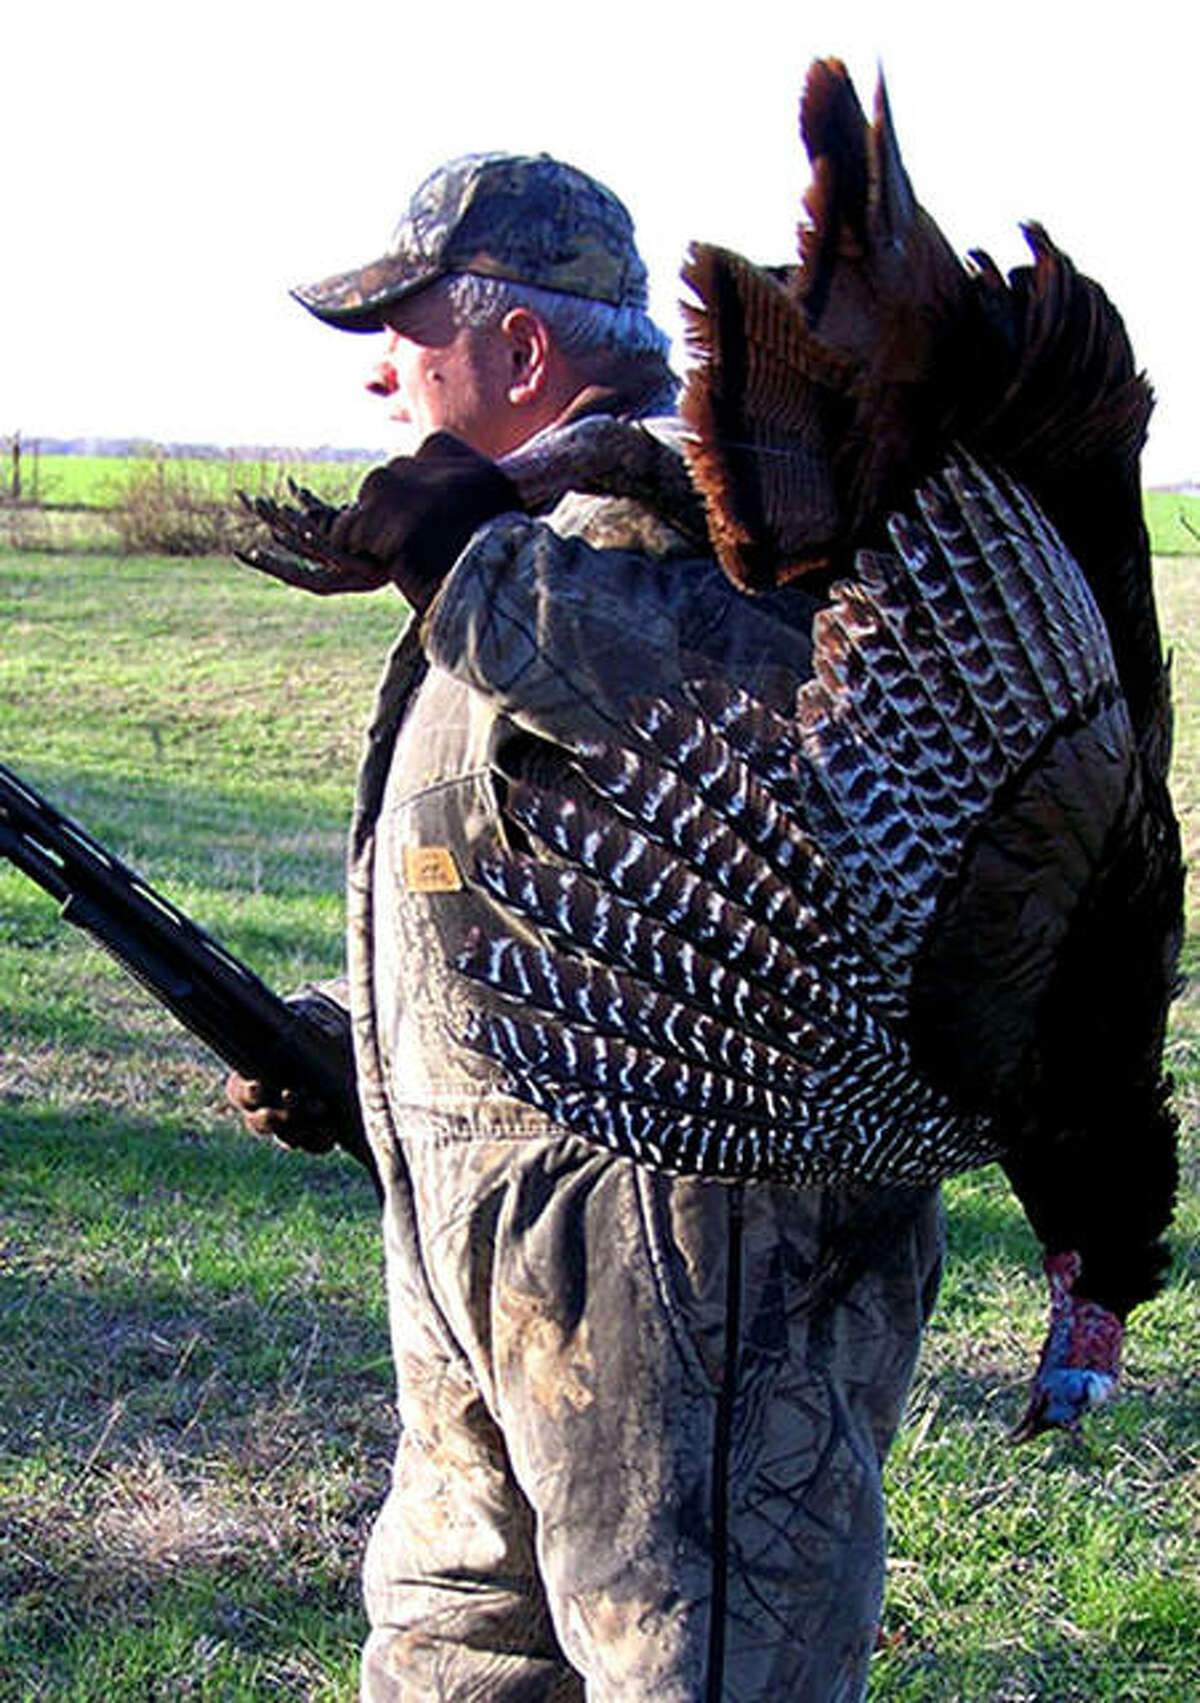 Though the archery wild turkey season has been open for more than two weeks, firearm hunters will take to the woods on Saturday in hopes of bagging their Thanksgiving dinner. The nine-day Illinois fall firearm turkey season continues through Nov. 1.